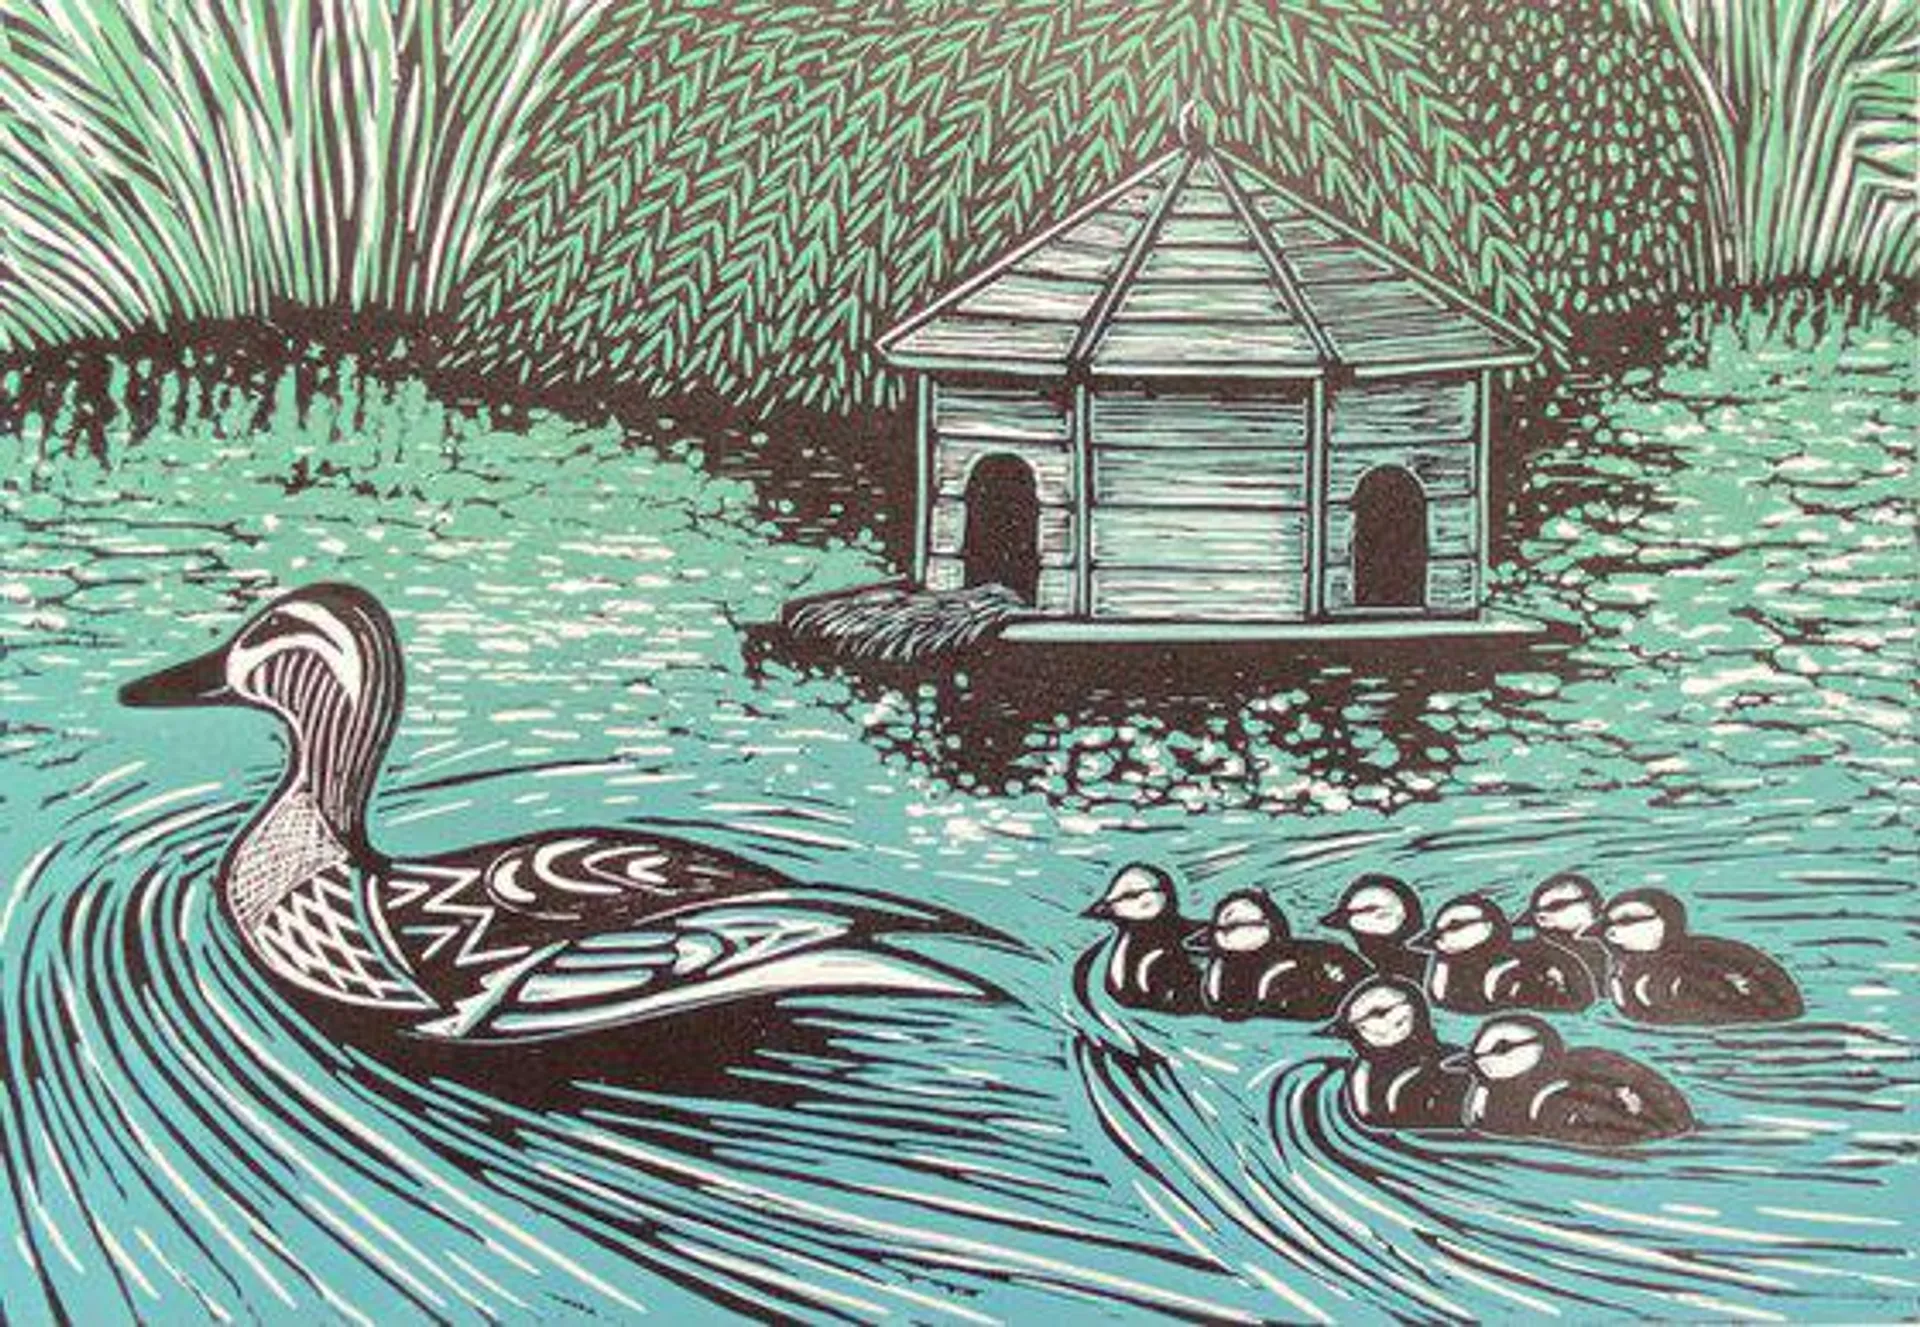 Limited edition handmade linocut. The Duck Pond 15/45.